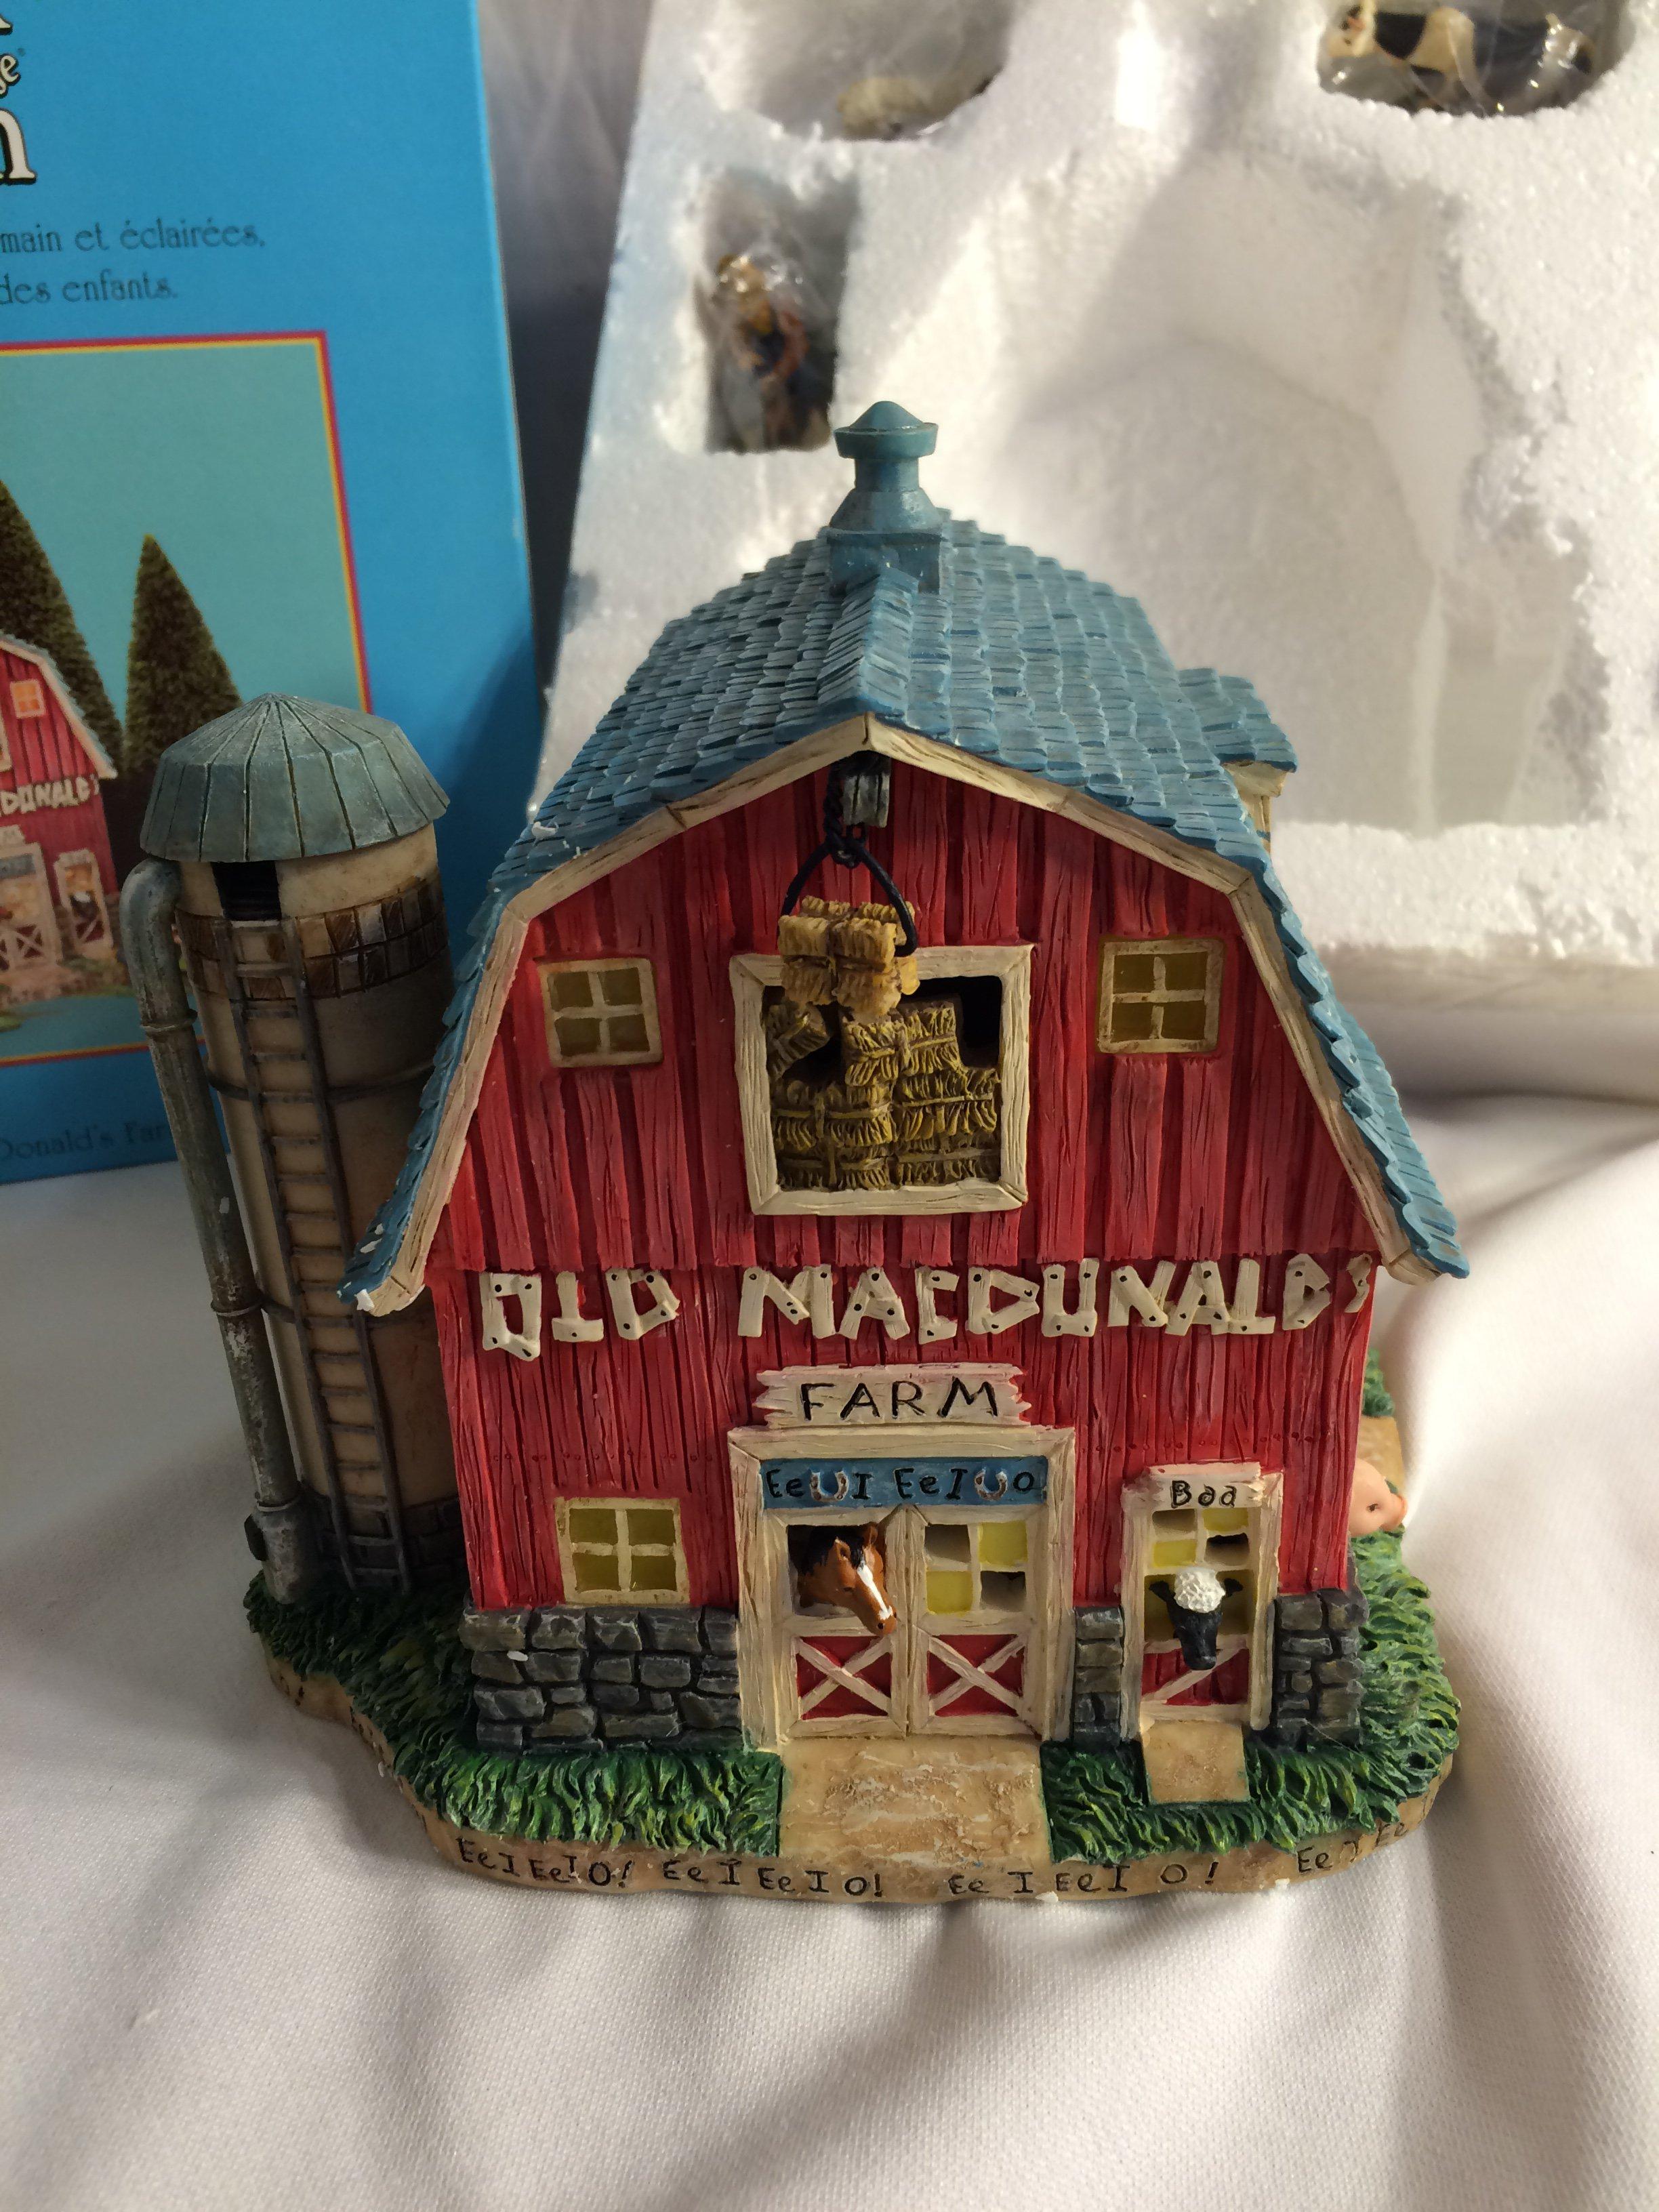 Storybook Village Collection "Old MacDonald's Farm"56.13244 Handpainted Lighted Building 11"t x9.5"